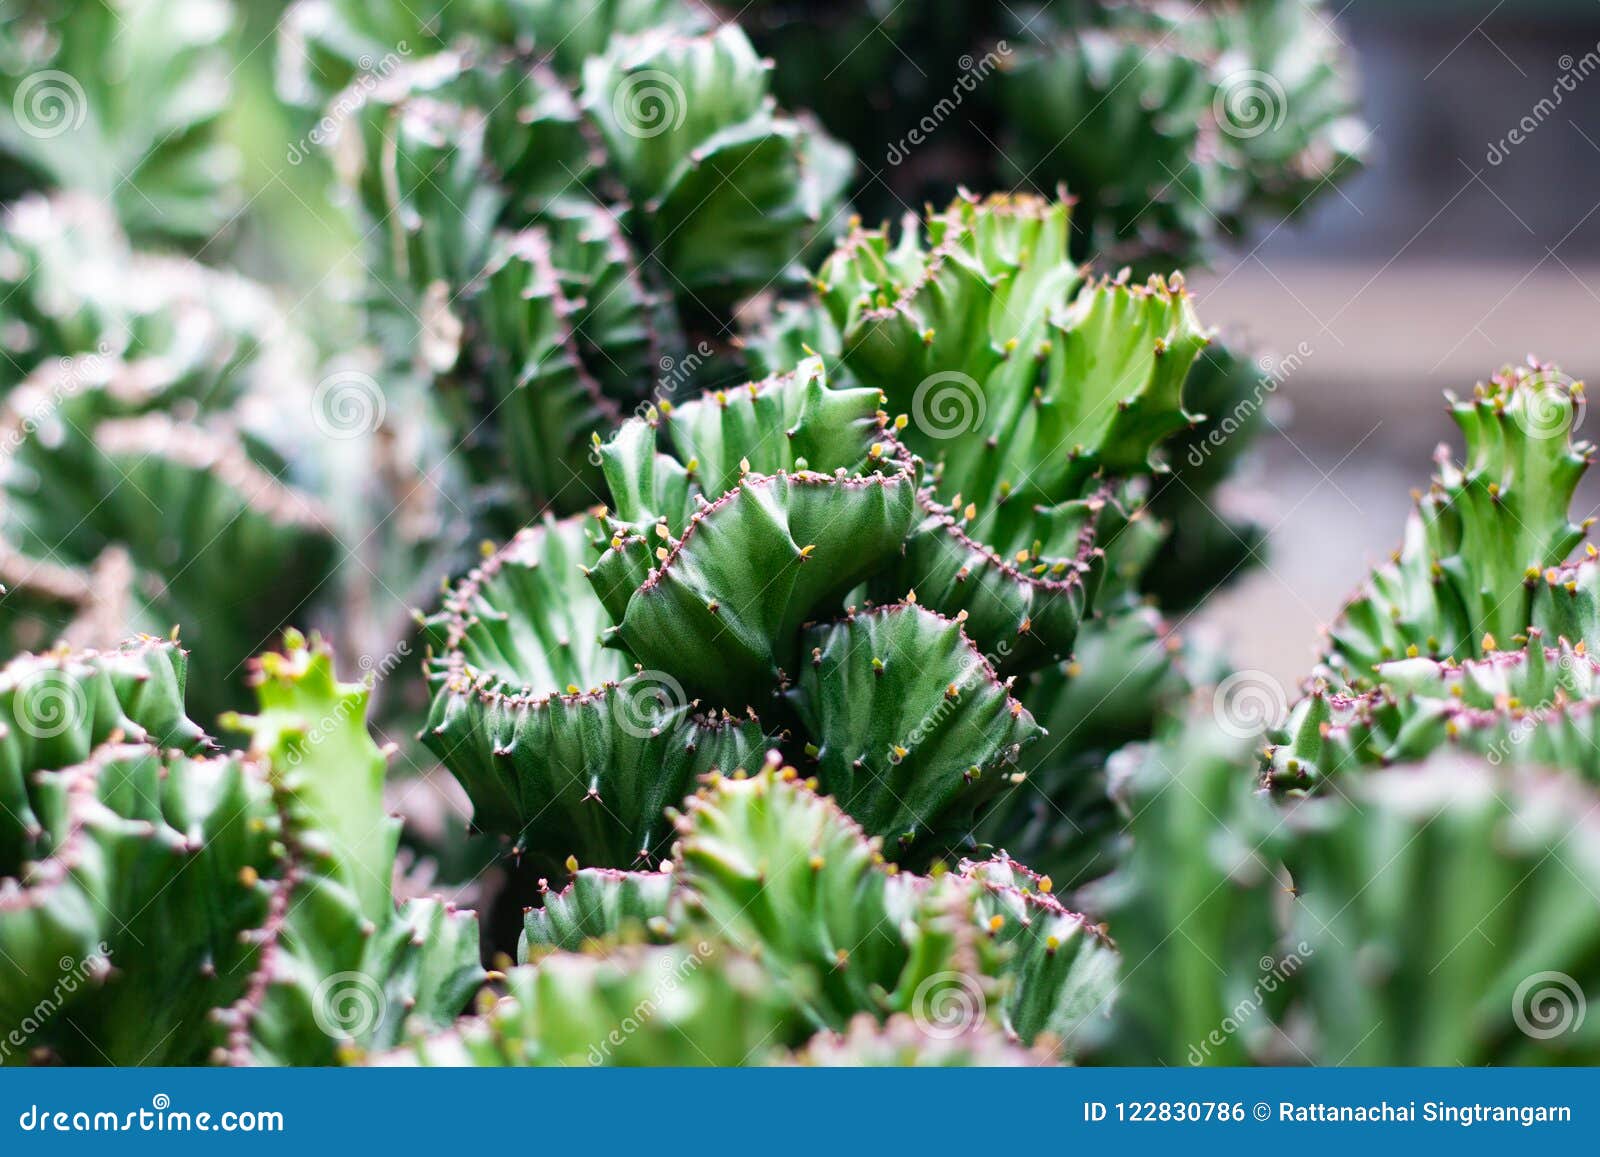 Fresh Cactus Plant With Prickly Pears Green Color Of Thorn Tree